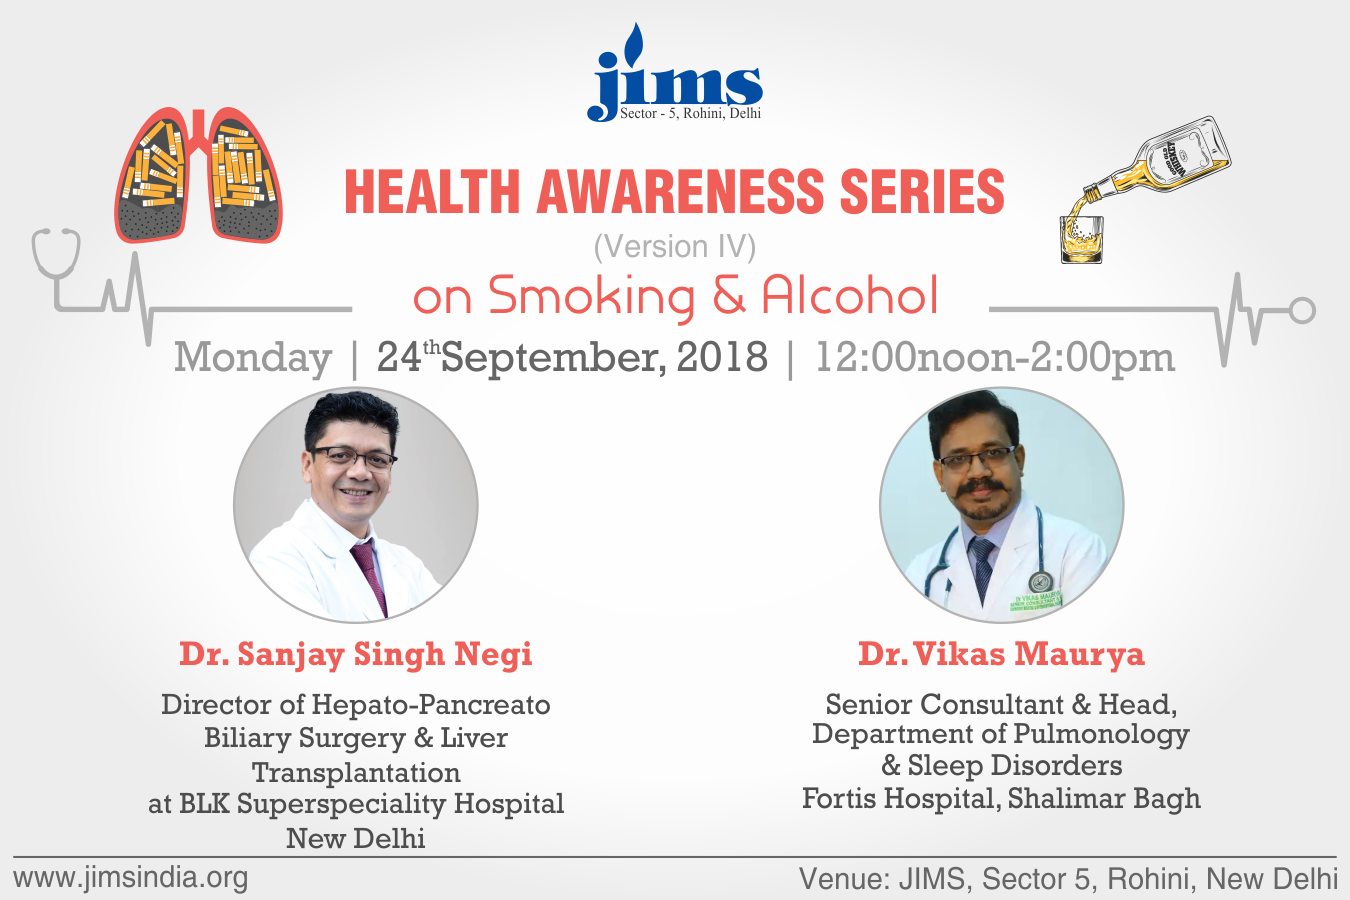 IP Department of JIMS is organizing Health Awareness Series Version IV on the theme Smoking and Alcohol on 24th September 2018